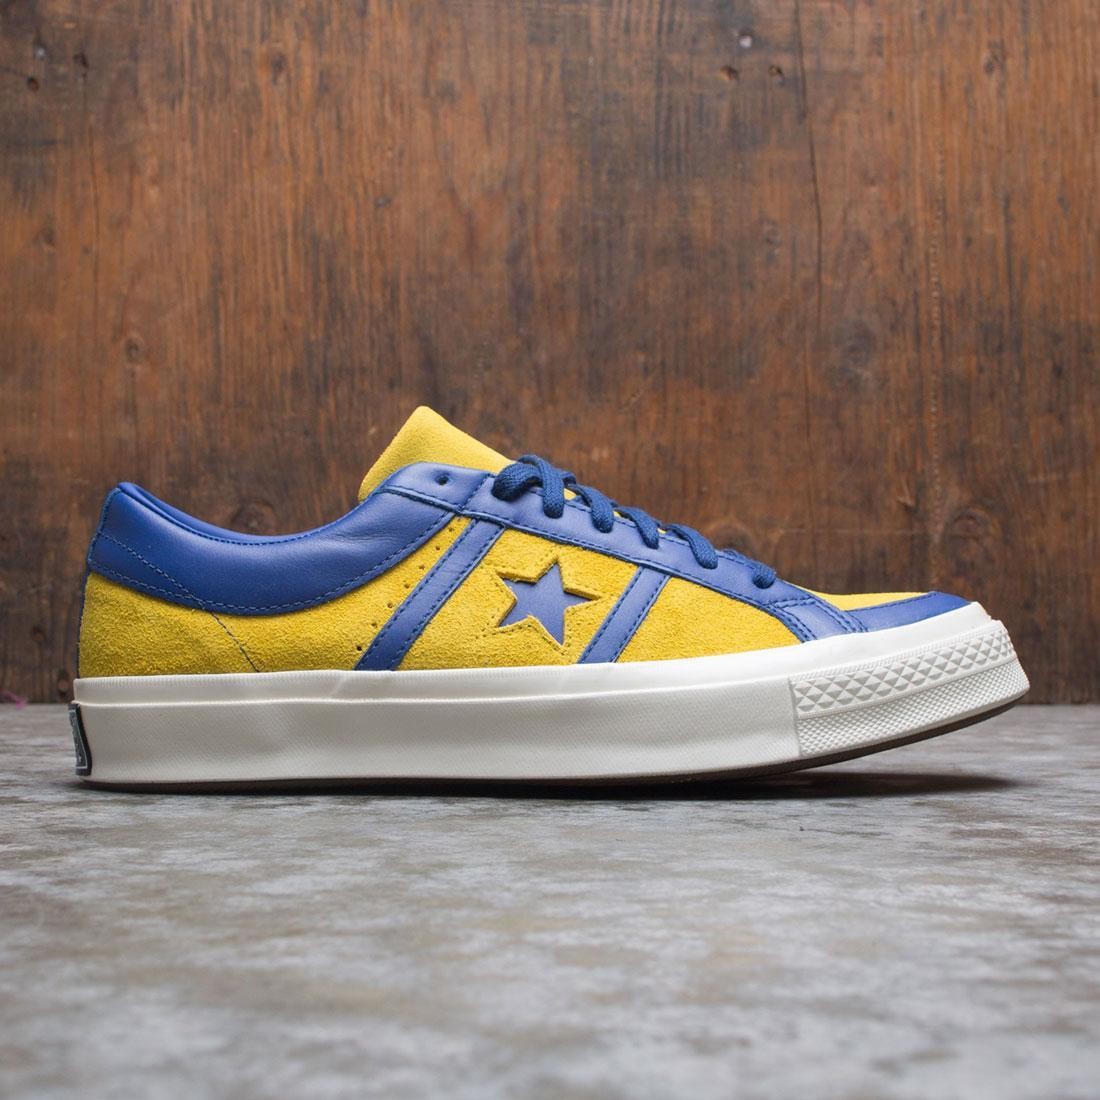 yellow suede converse one star